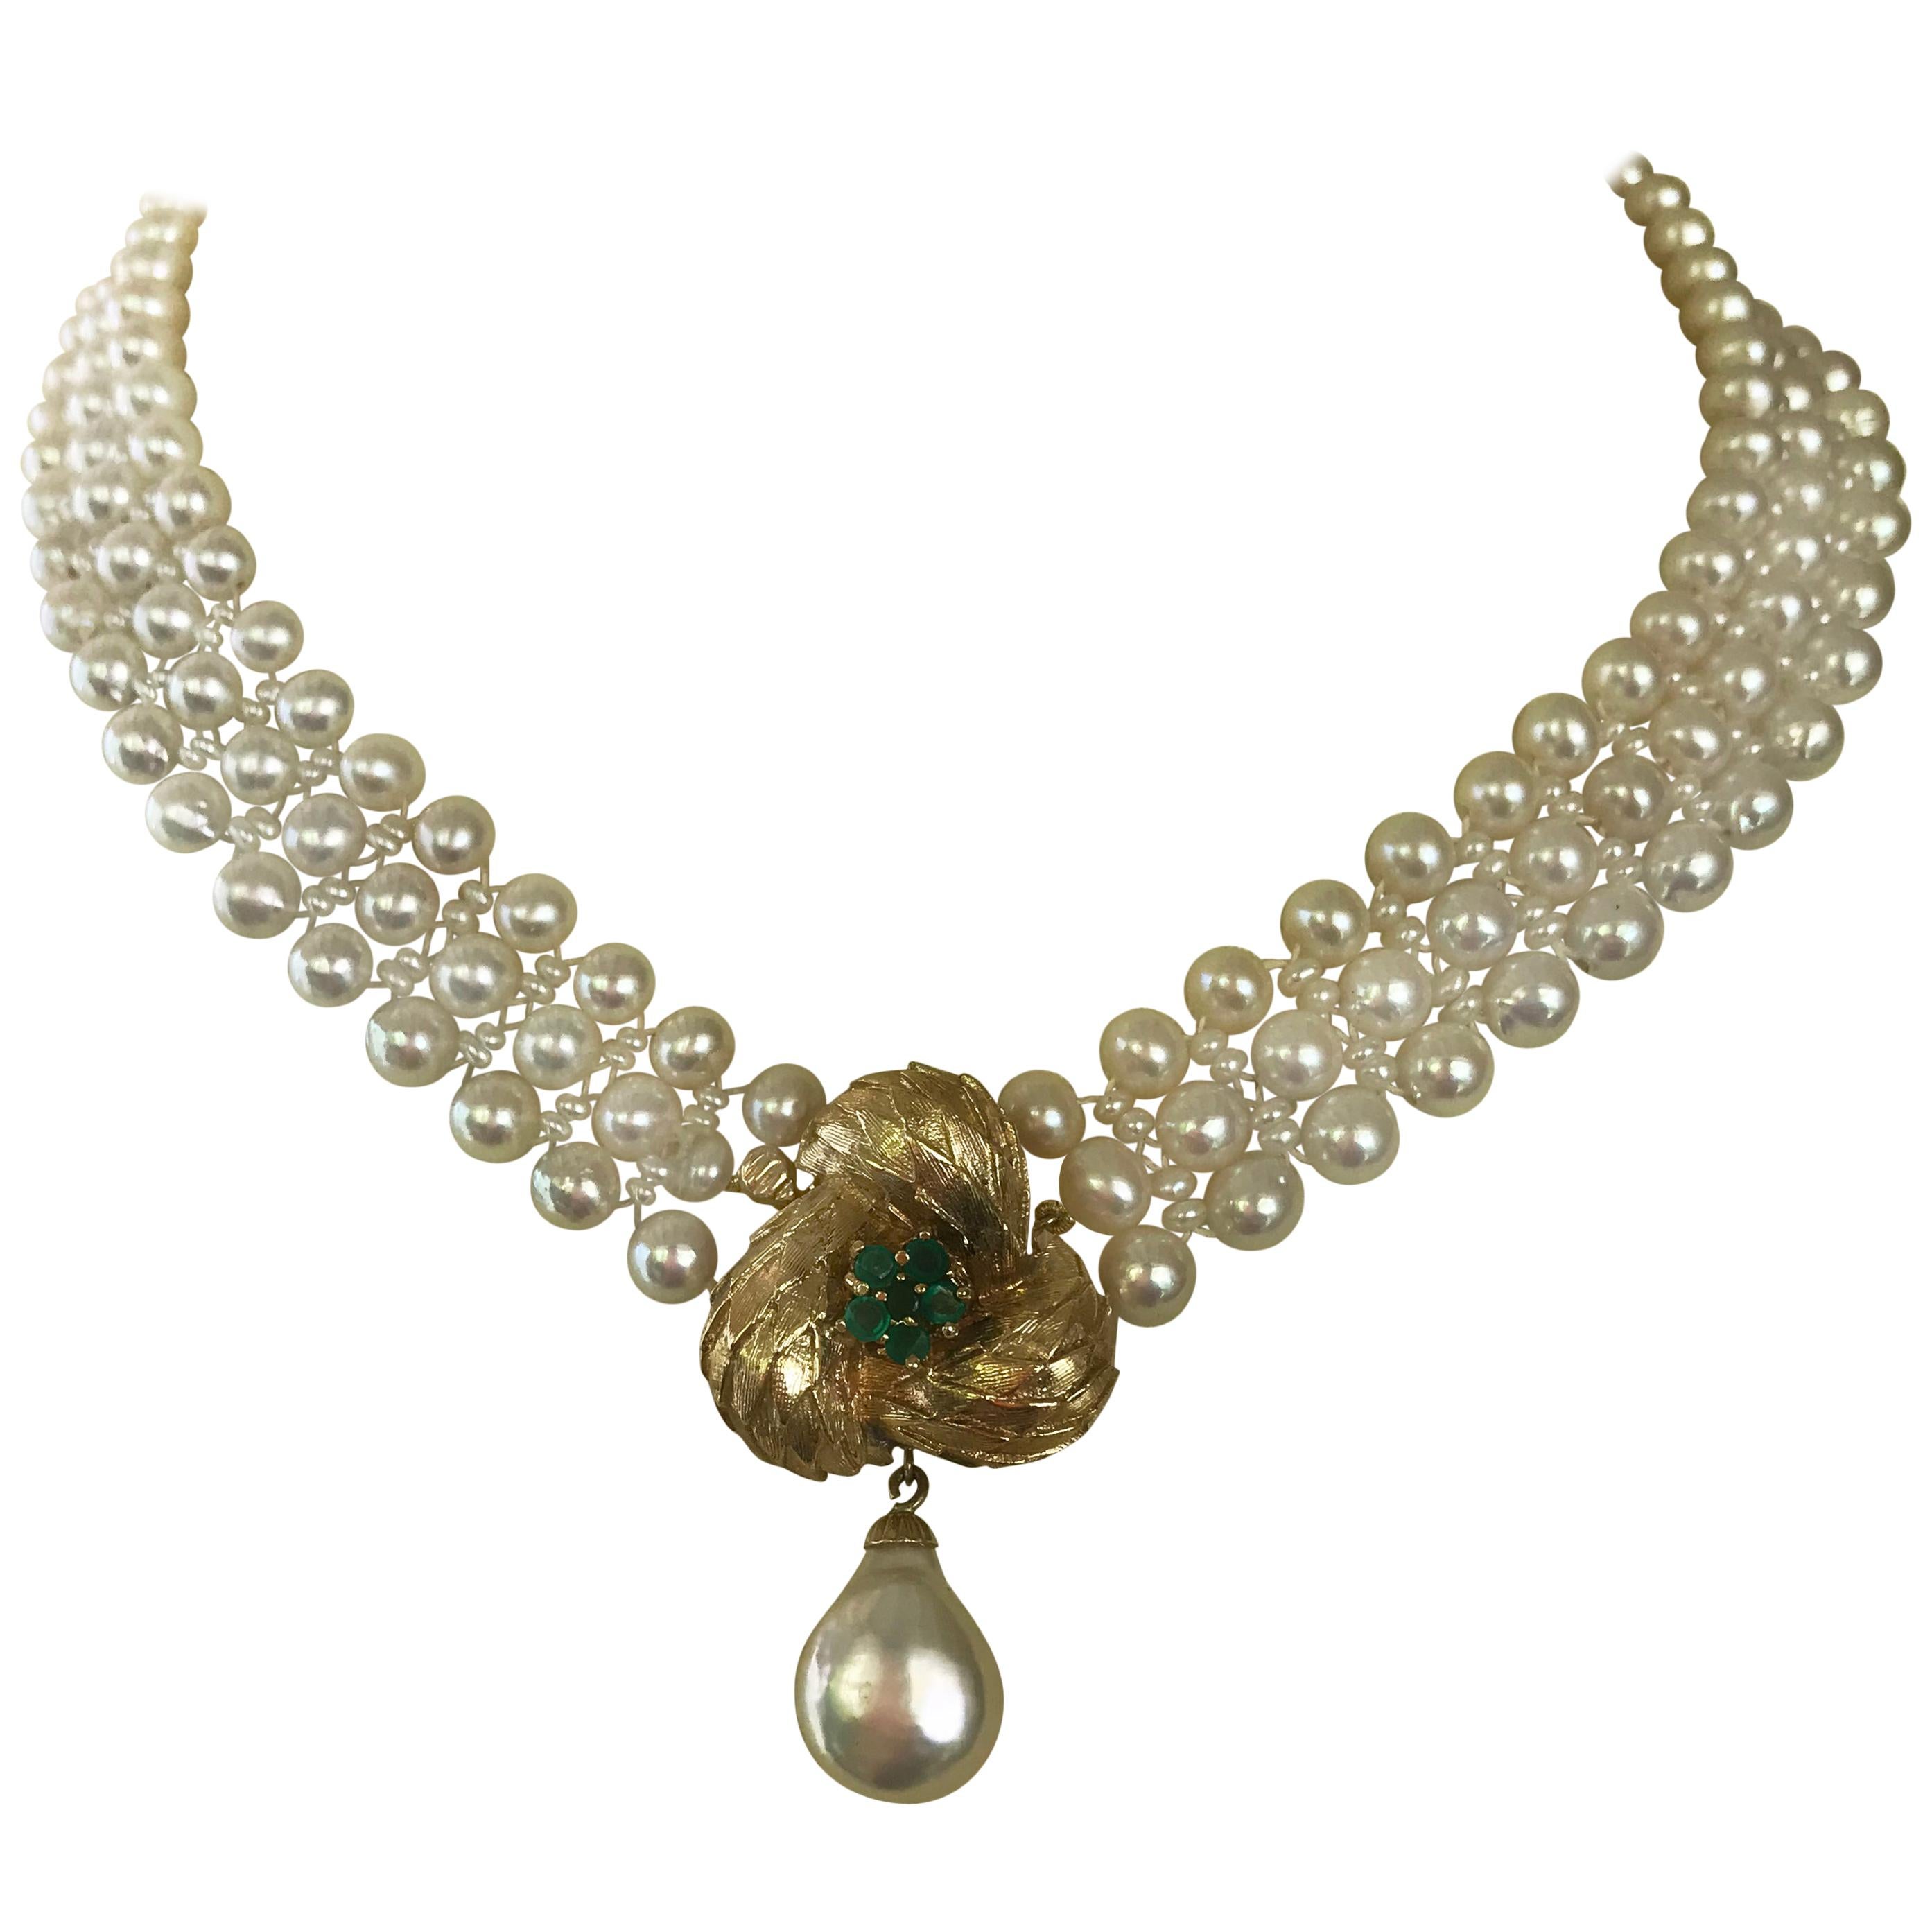 Marina J. Pearl Necklace with Vintage 14k Yellow Gold and Emerald Center-Clasp For Sale